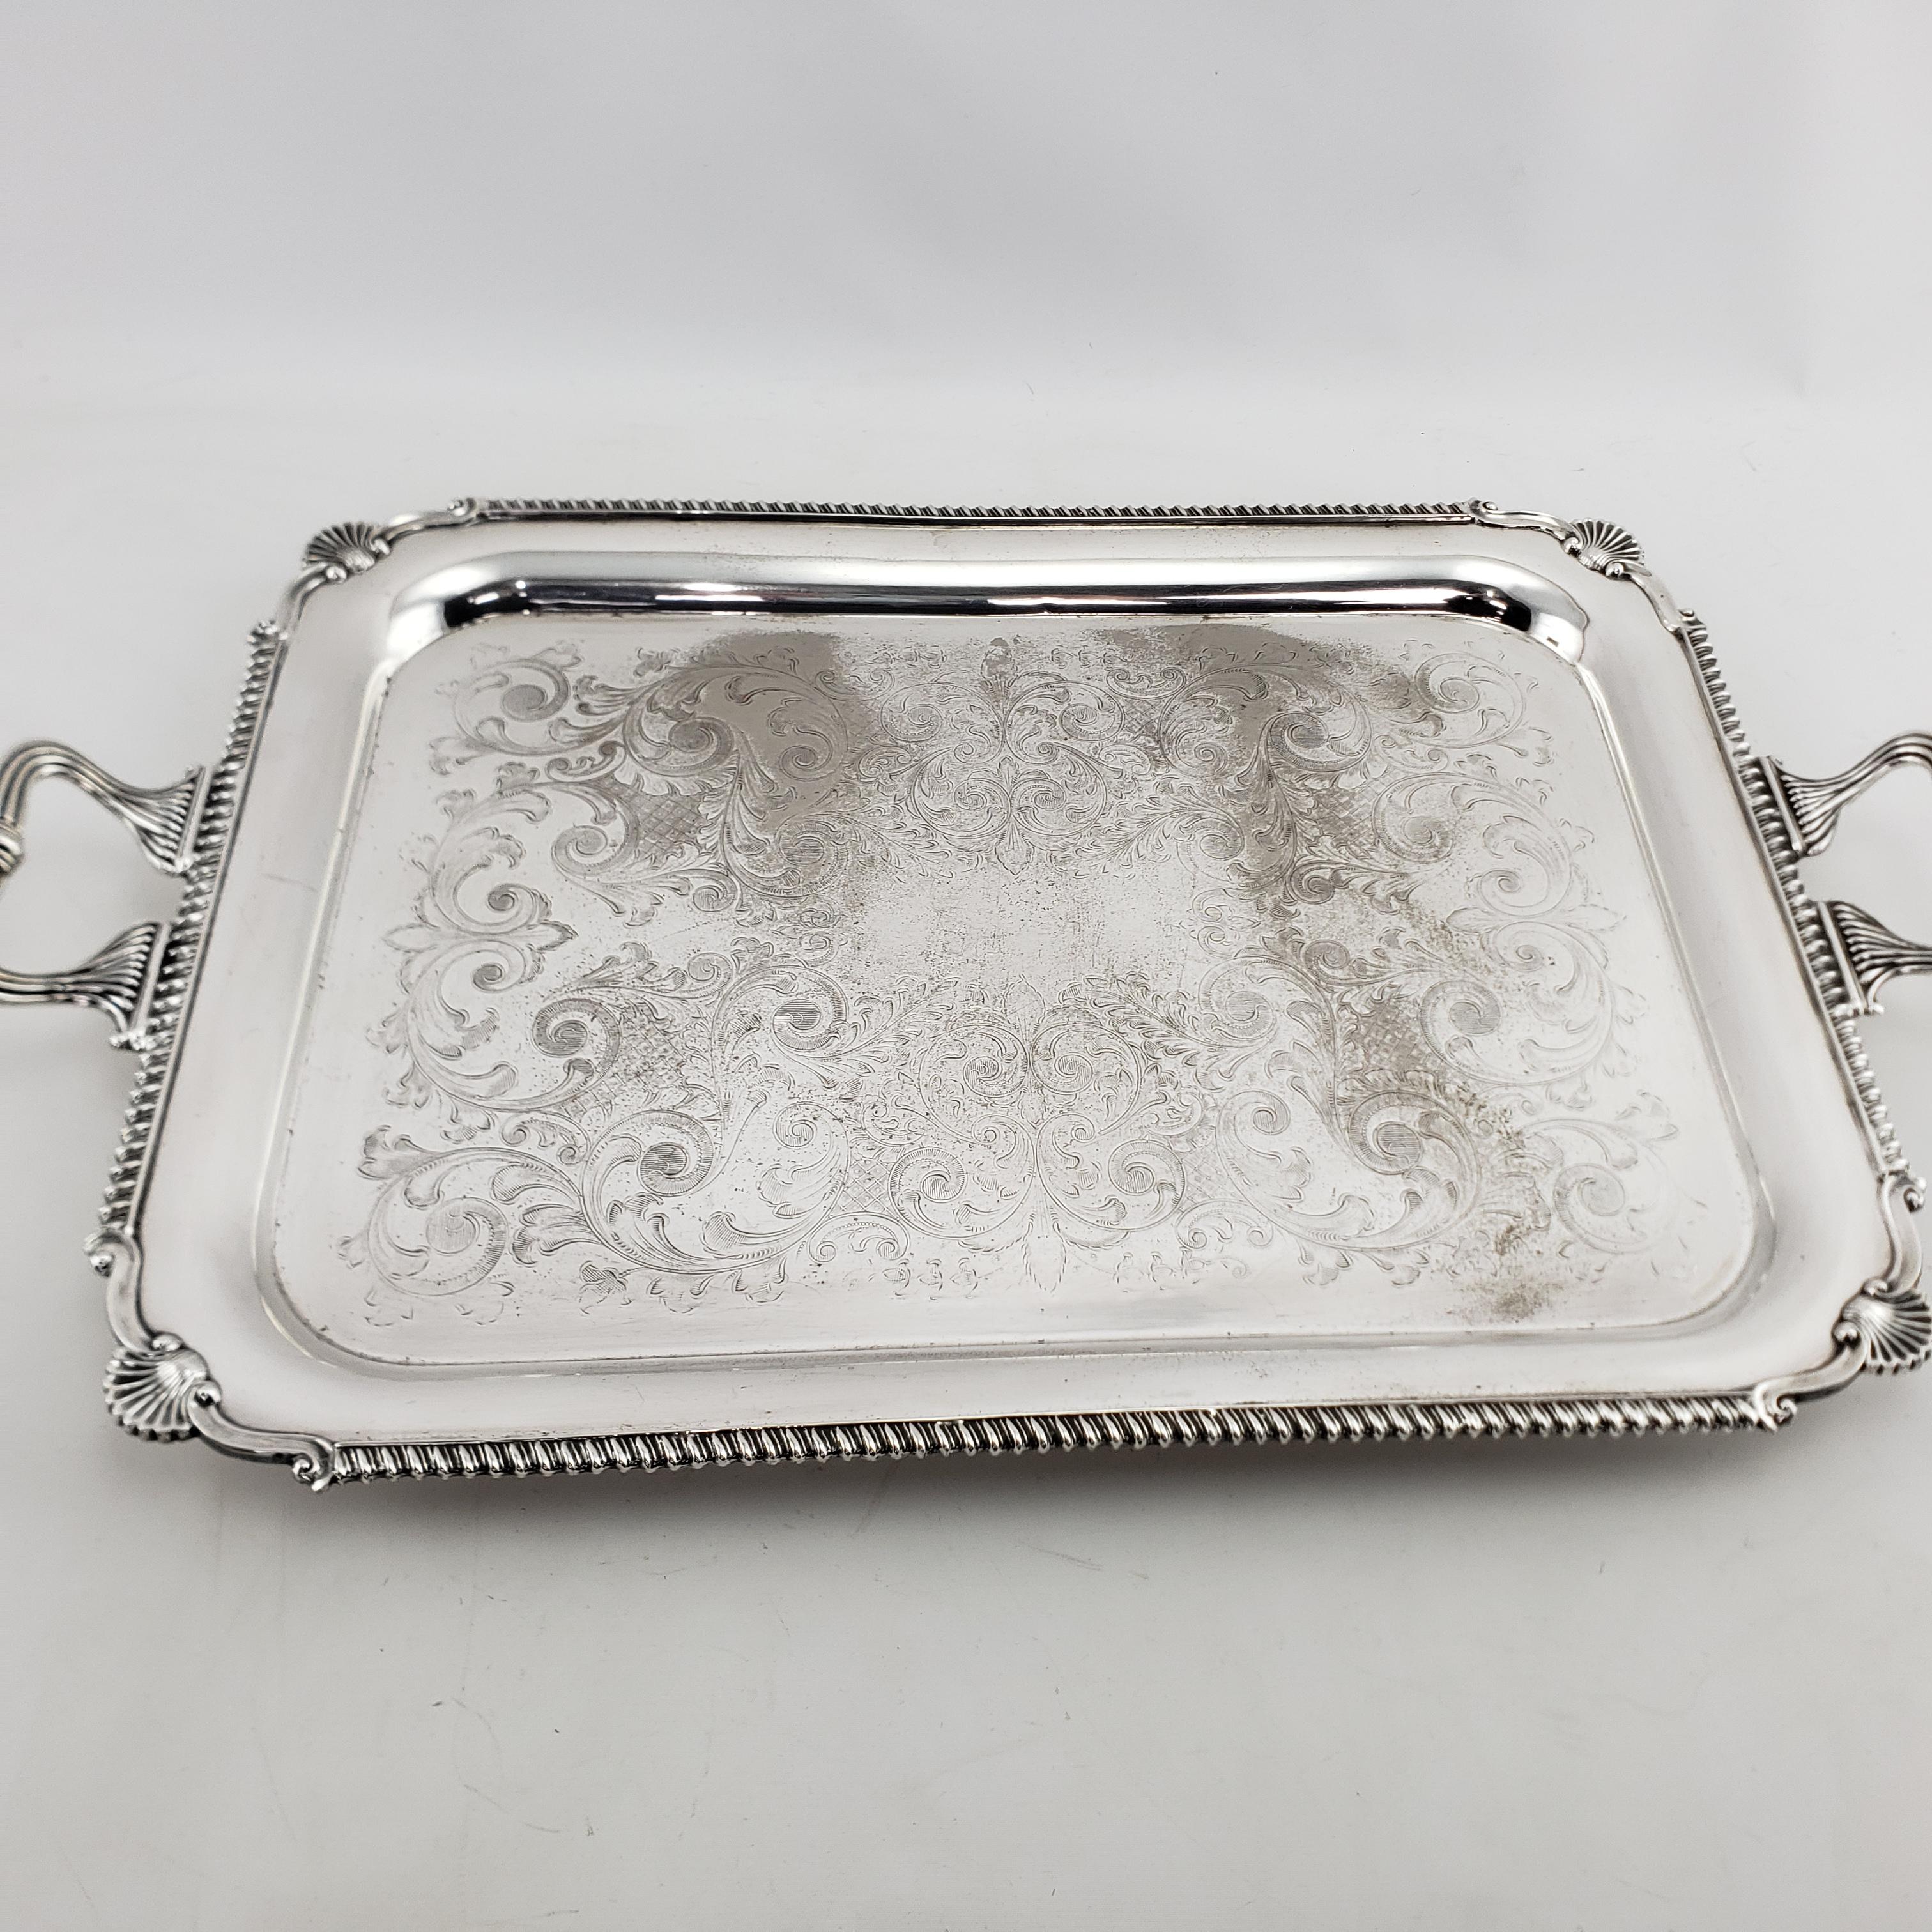 Large Antique English Edwardian Styled Rectangular Silver Plated Serving Tray 5